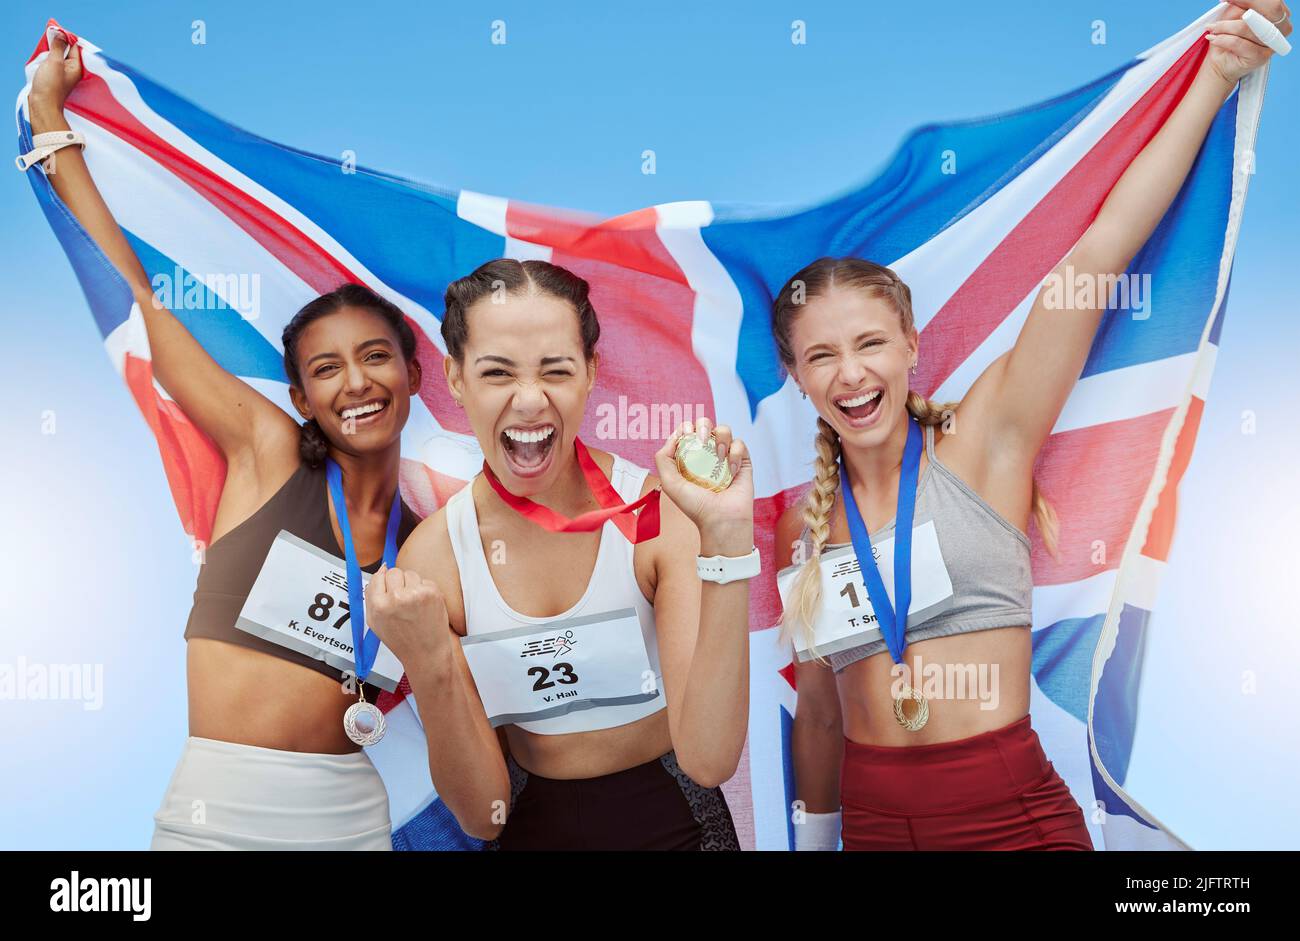 Diver British athletes celebrating their olympic gold medal wins, waving a Union Jack flag. Happy and proud champions of United Kingdom. Winning a Stock Photo